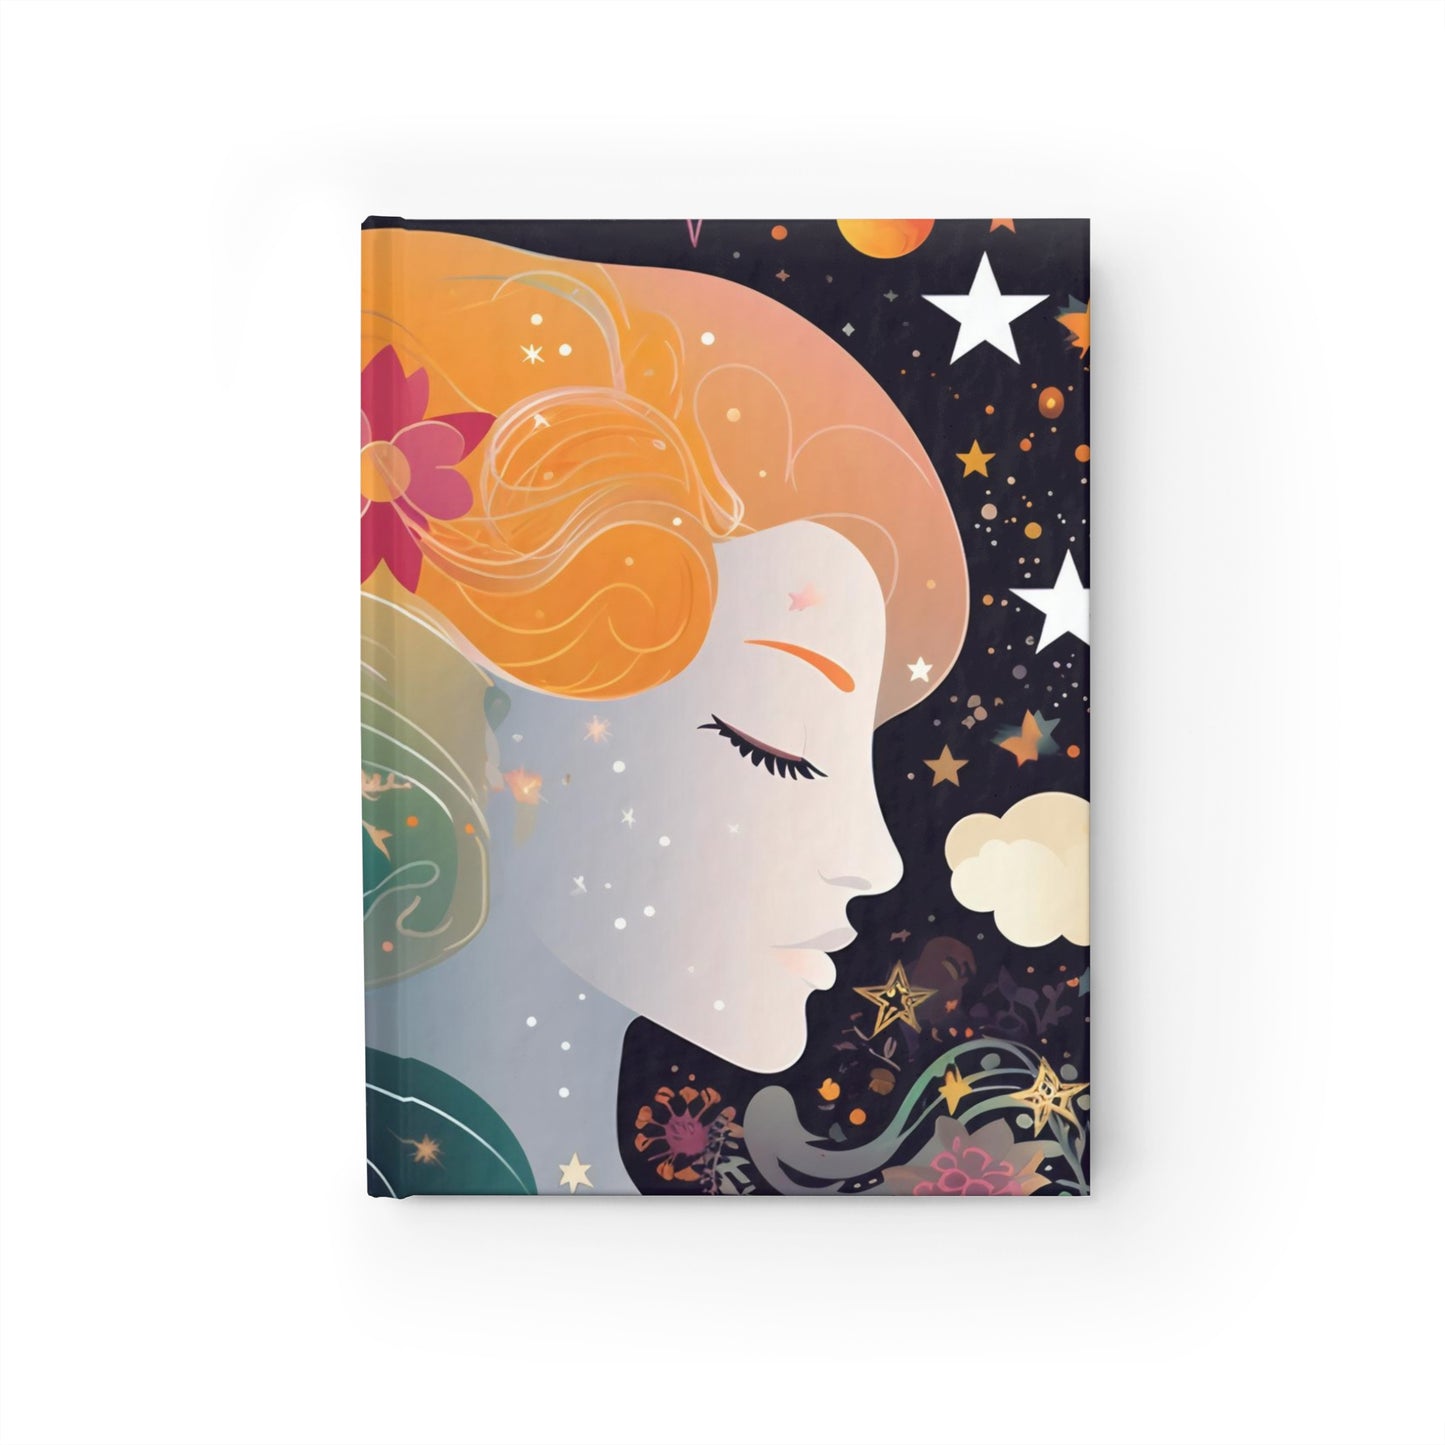 My Dream Journal, My Secret Diary, Cosmic Space Flowers Journal, Beauty of the Universe, Hard Cover, Ruled Line